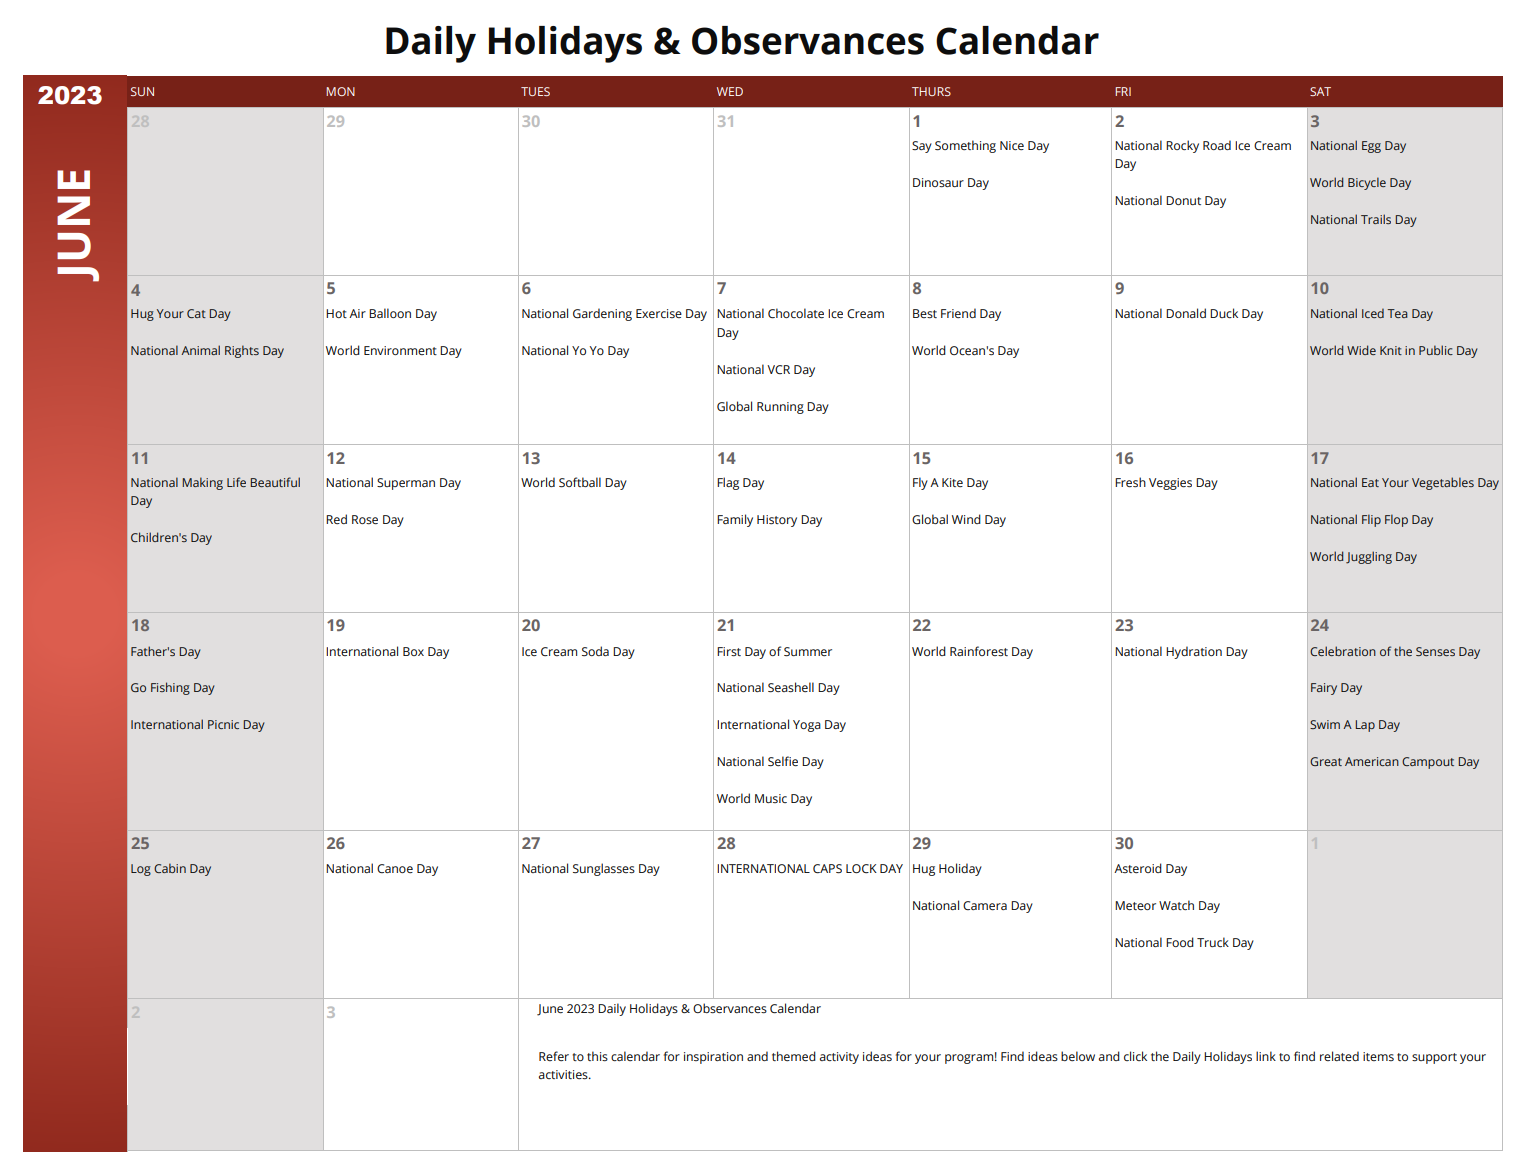 June 2023 Daily Holidays and Observances Calendar